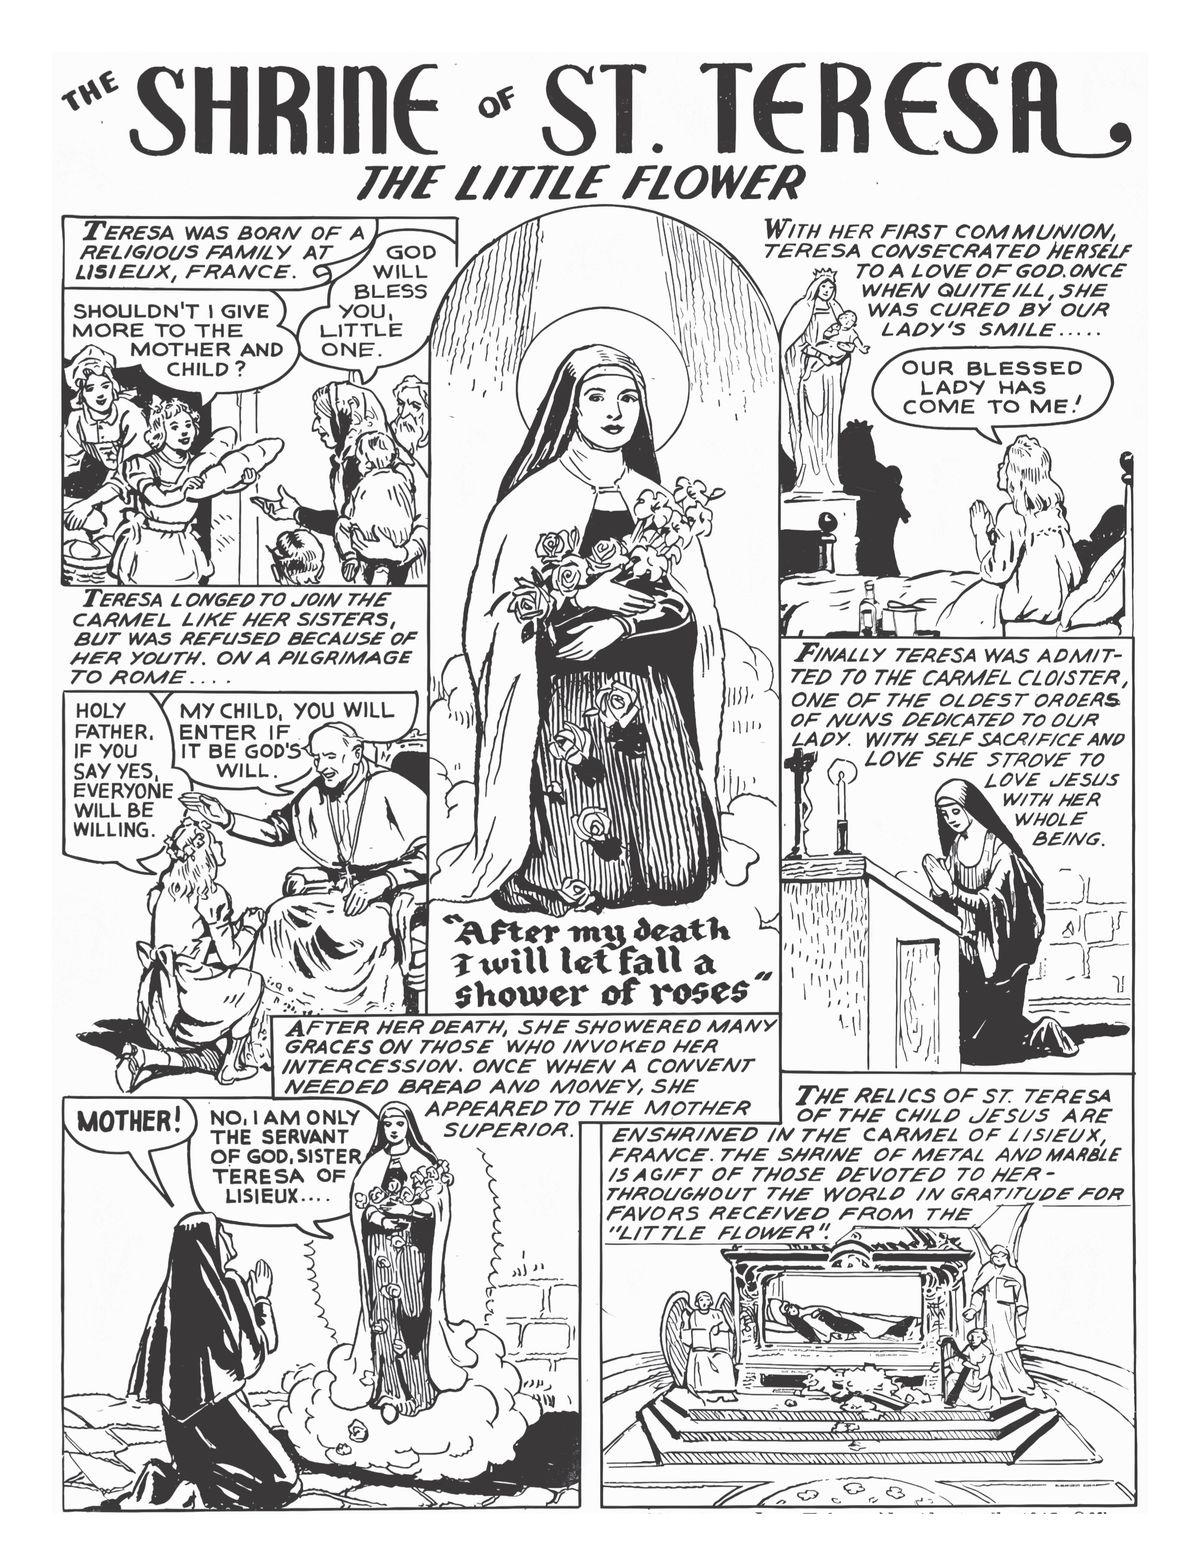 The Shrine of Saint Therese (The Little Flower) - Catholic Comic Book Coloring Page